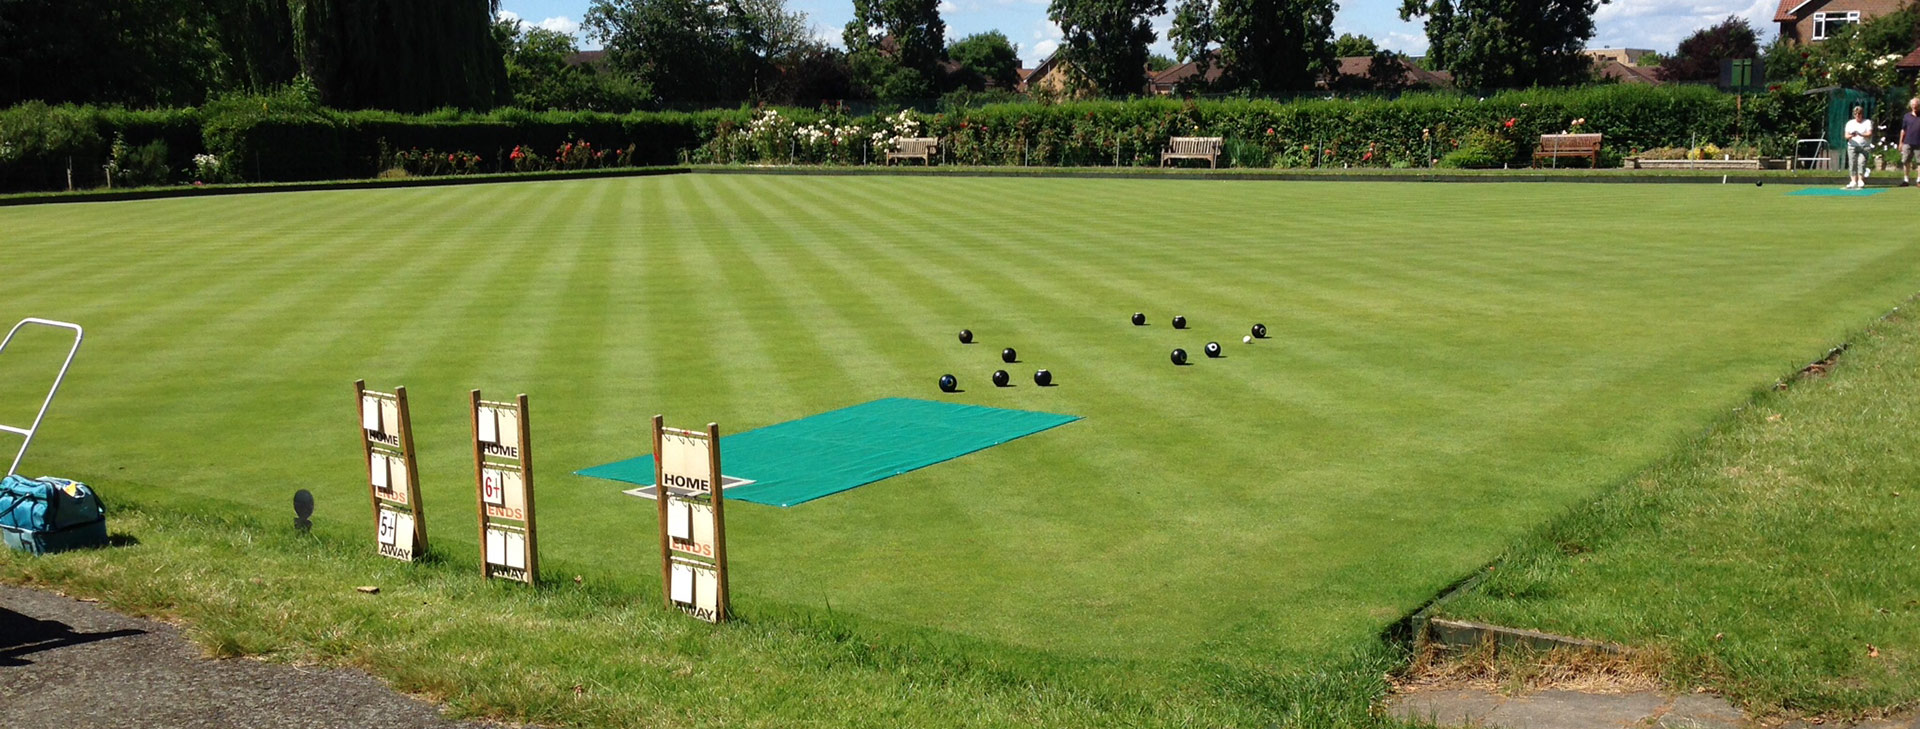 We have been maintaining bowling greens for over 30 years